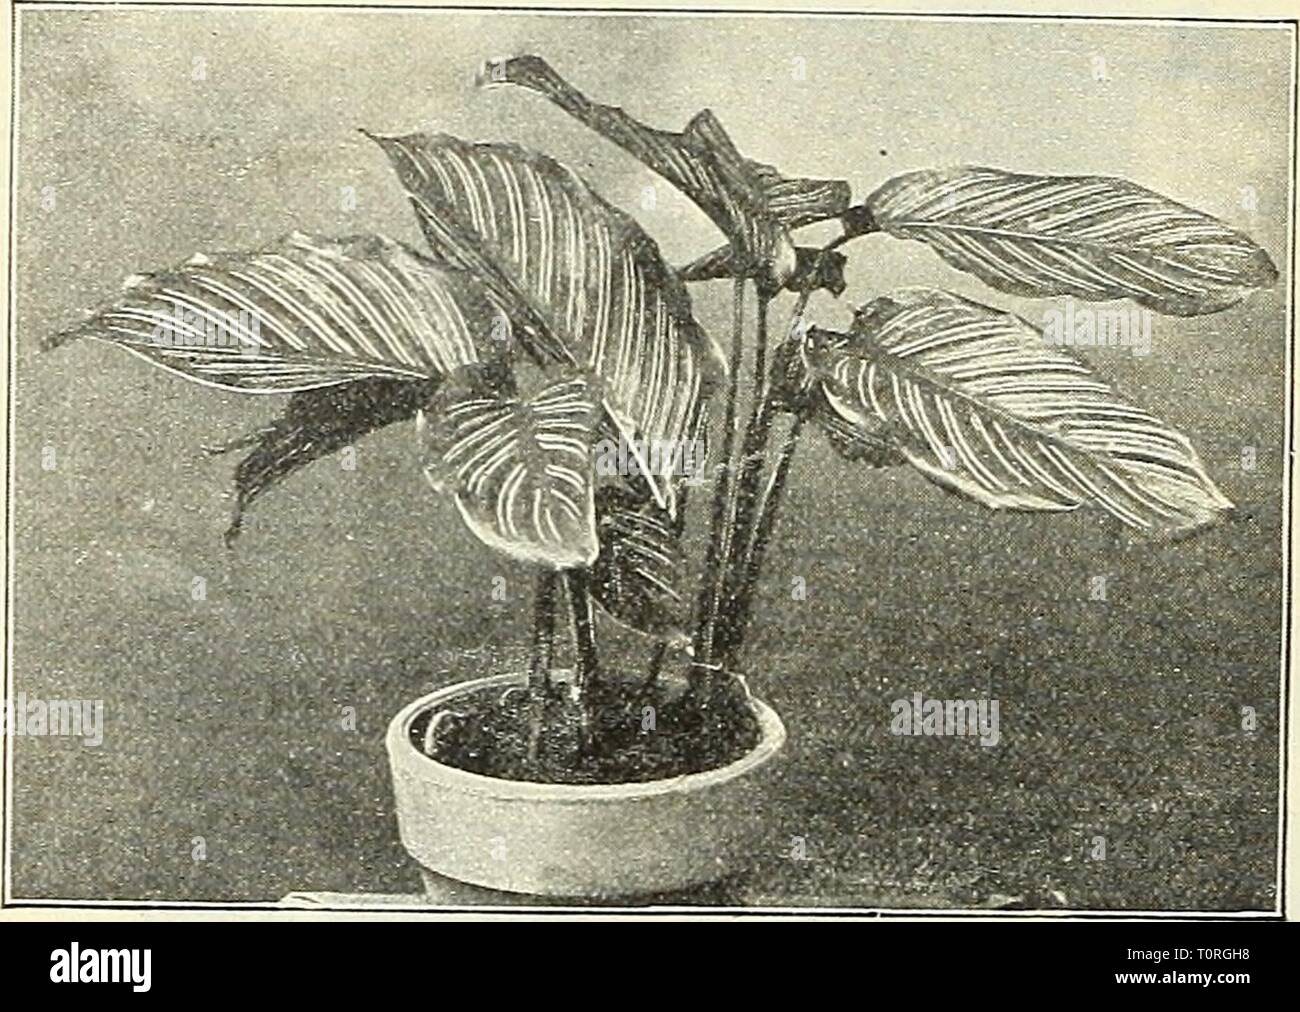 Dreer's garden book  1904 Dreer's garden book : 1904  dreersgardenbook1904henr Year: 1904  brilliant orange Laniana Craigi.    Maranta Rosea Lineata. MANETTIA. Bicolor. The popular Man- ttlia Vine, and a desir- able climber, either for the garden or house; long tubular flowers, bright scarlet, yellow at the tips. Cordifolia. Crimson flow- ers; one of the most grace- ful vines in our collection. 10 cts. each ; $100 per doz. Milla Biflora. (Me.xican ' Star of Bethlehem.') One of the loveliesr and most desirable bulbs. The flowers are nearly 2^ inches in diameter, of a pure waxy- white color, and Stock Photo